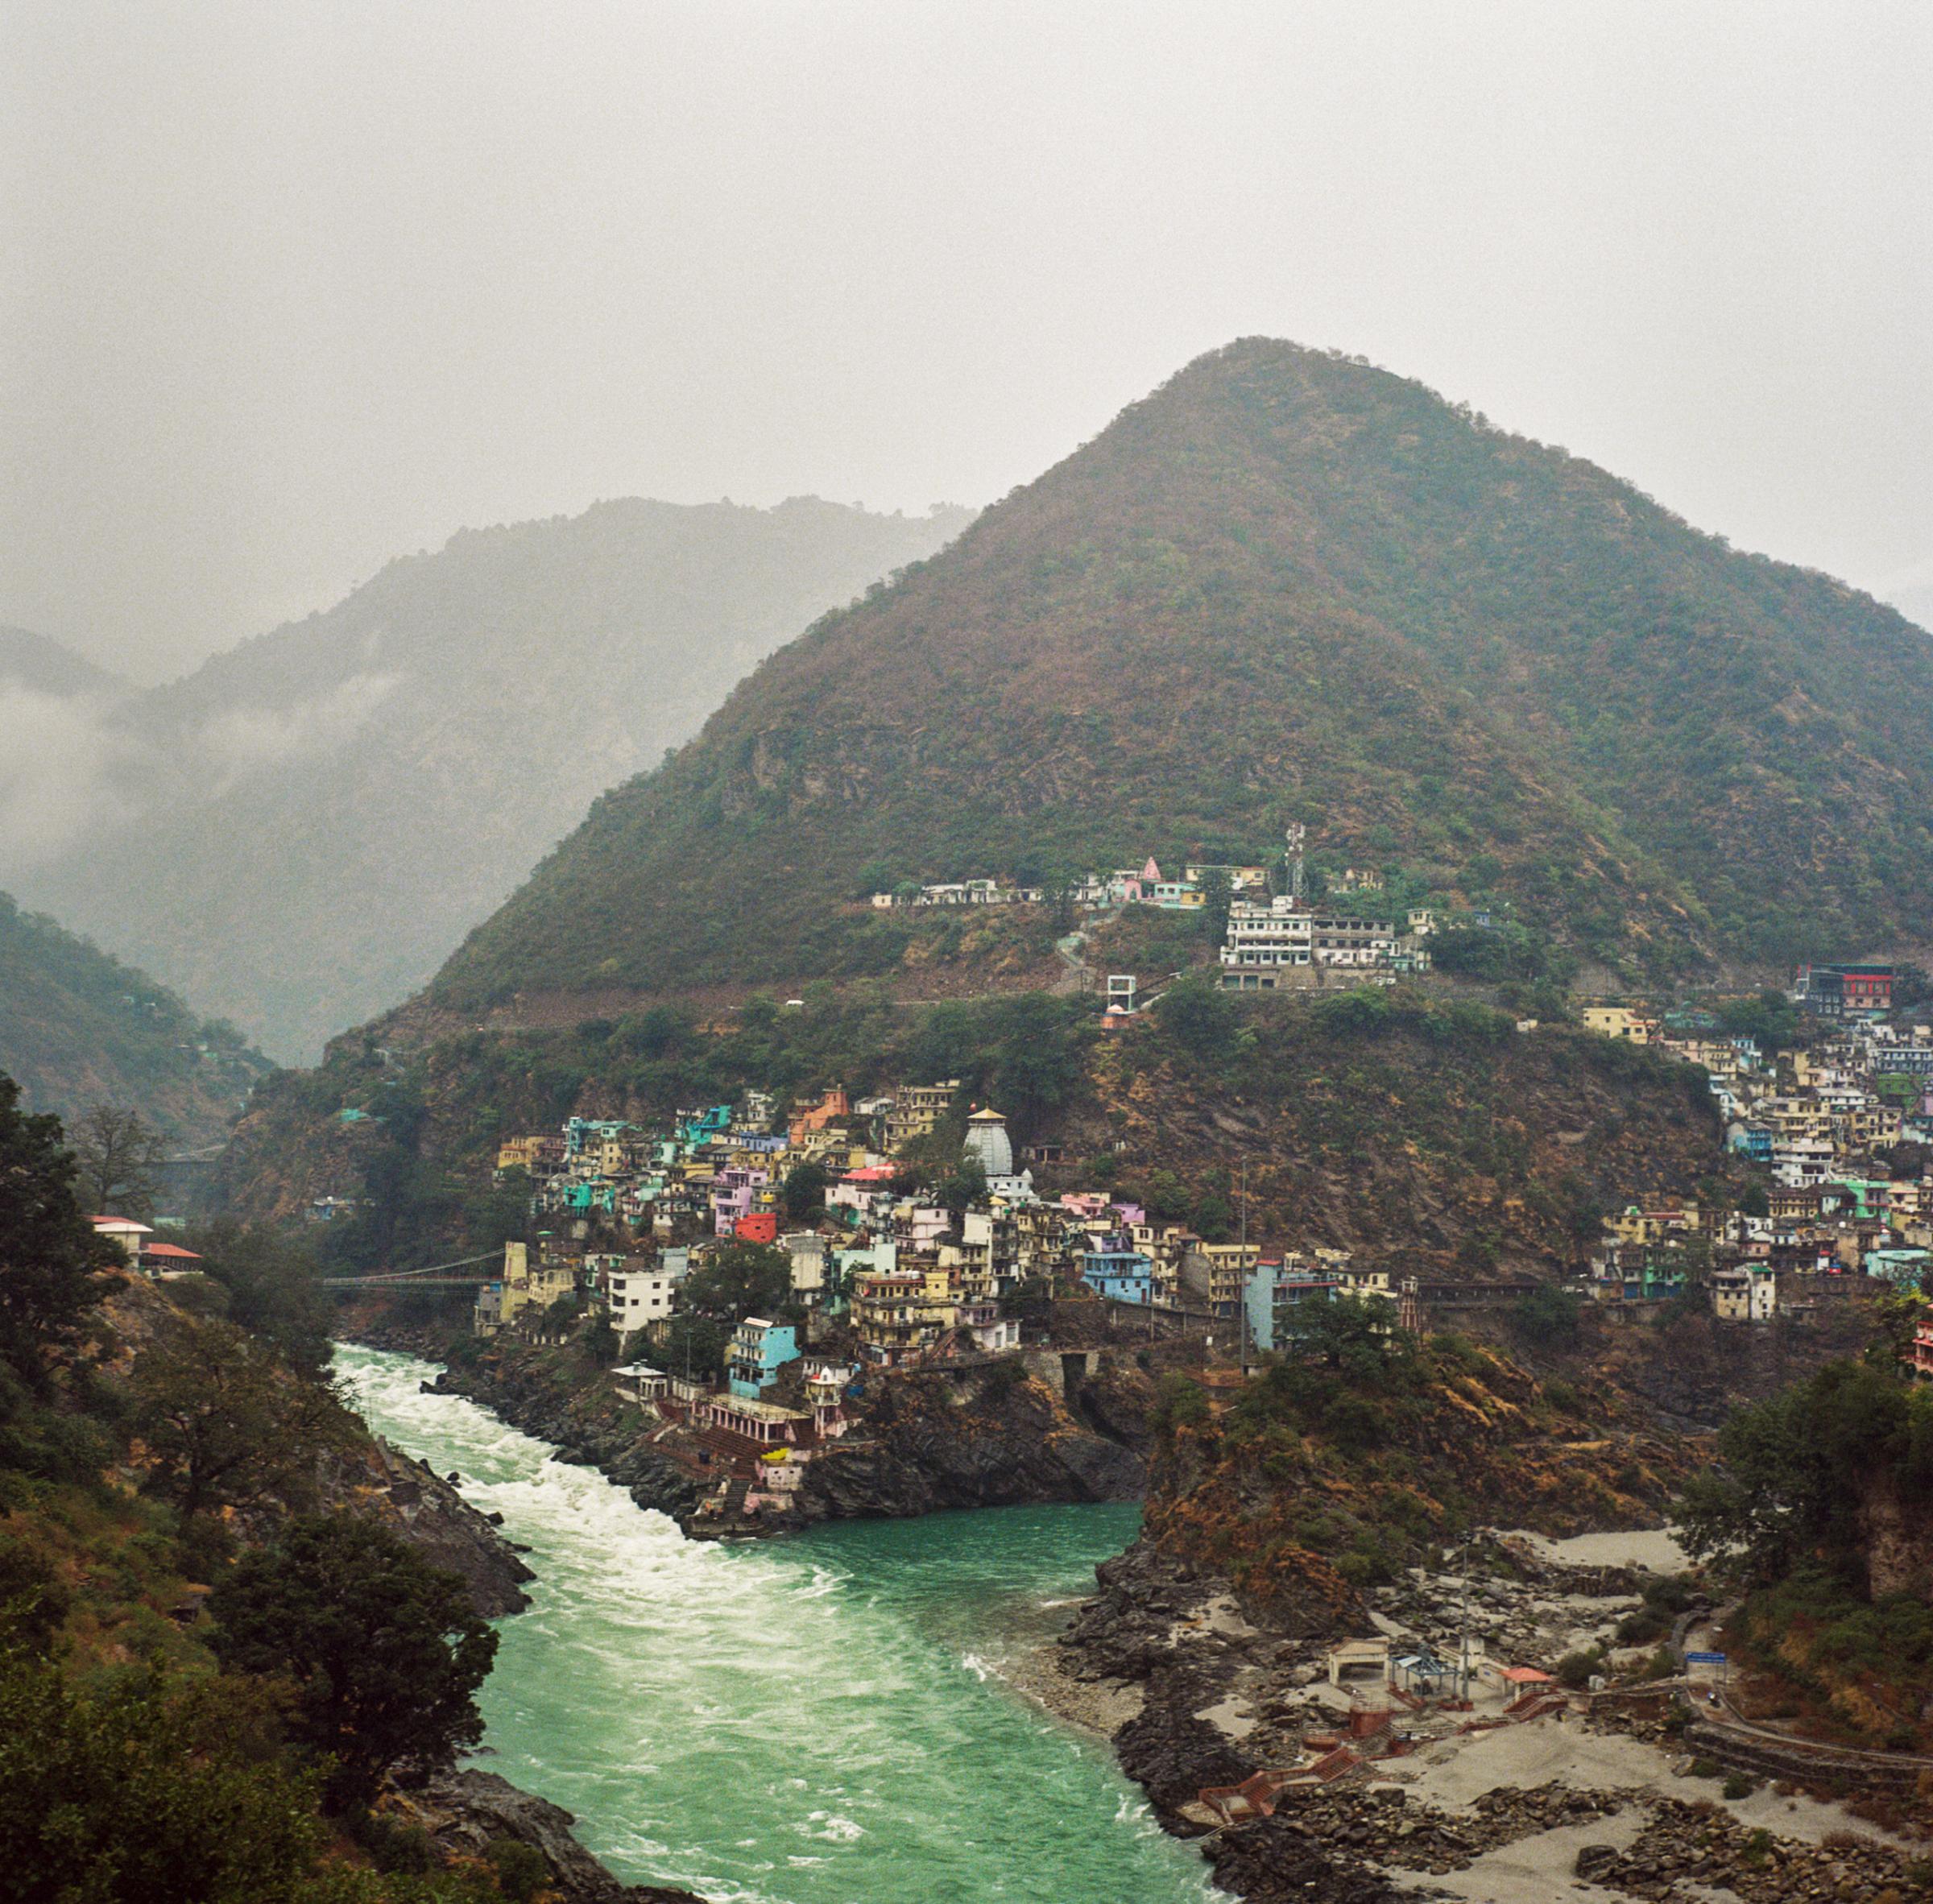 Two rivers, the Bhagirathi and the Alaknanda, converge in the western Himalaya to form the Ganges, at the Indian town of...